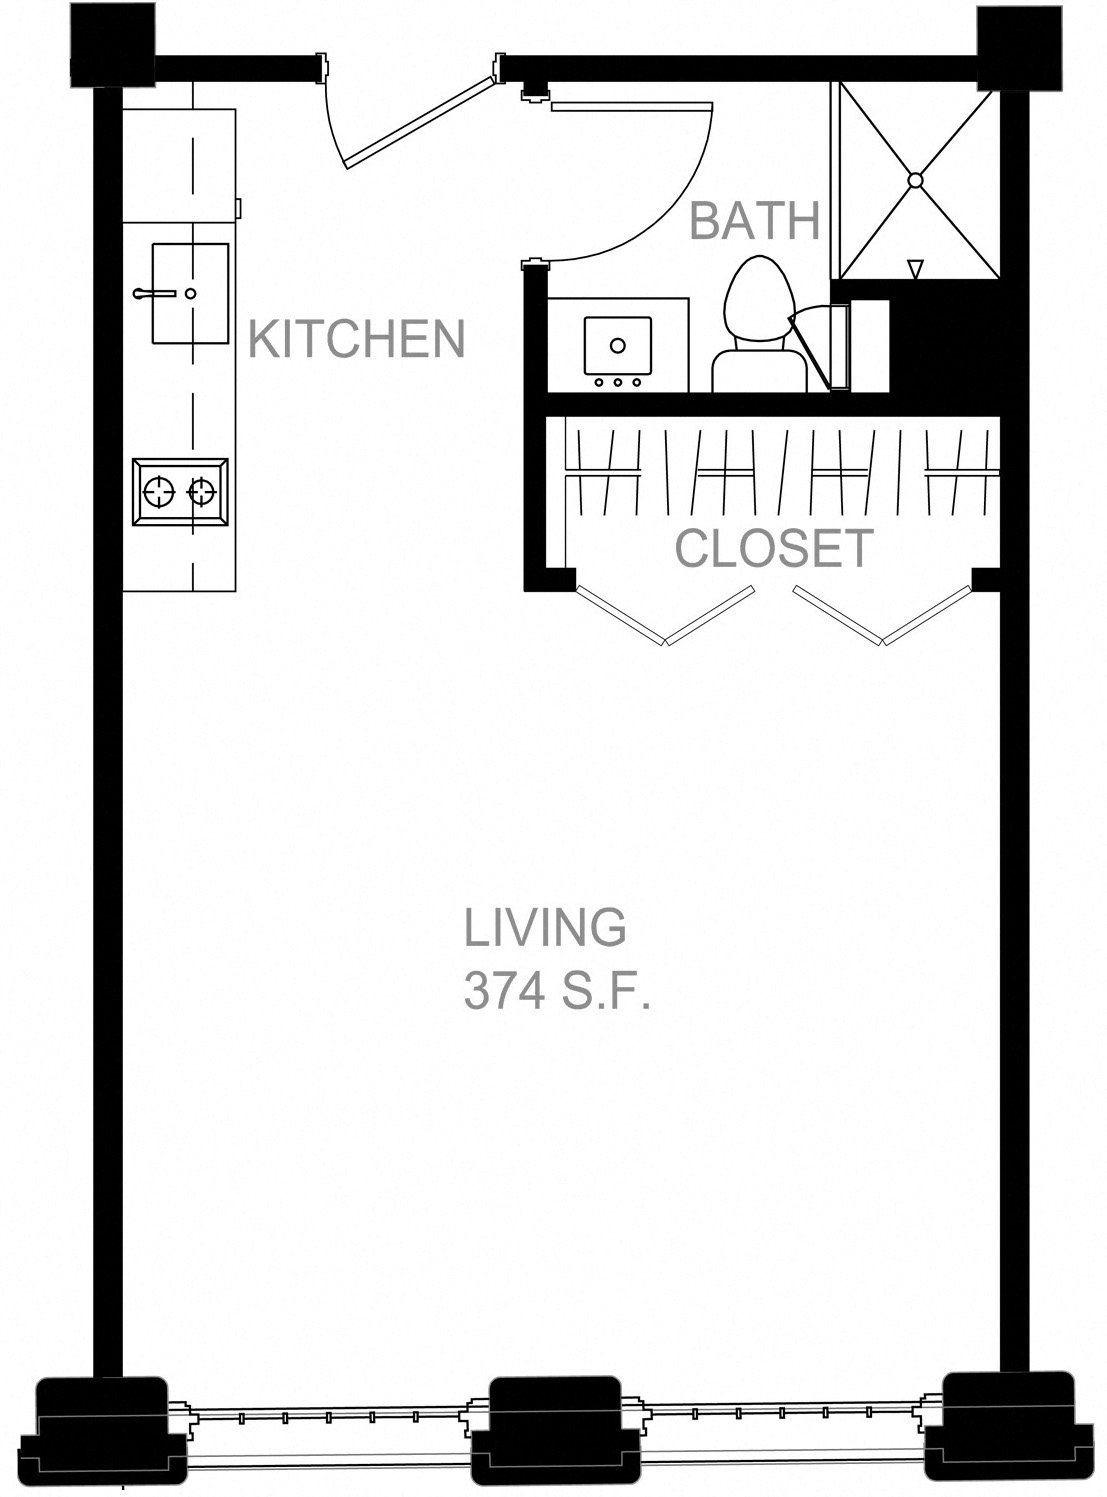 Floorplan for Apartment #S2329, 0 bedroom unit at Halstead Providence